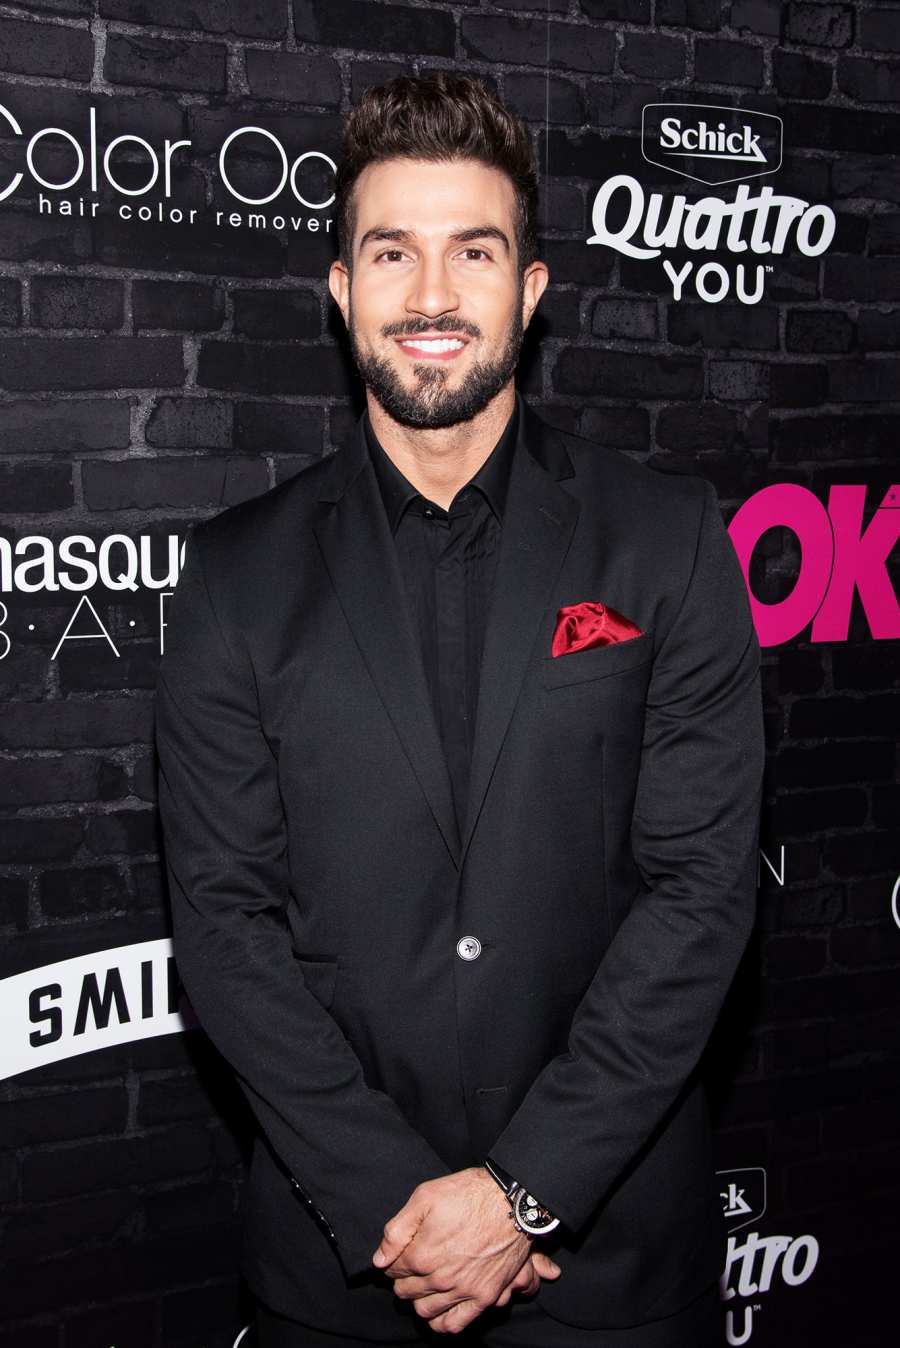 Bryan Abasolo Stars Obsessed with Keto